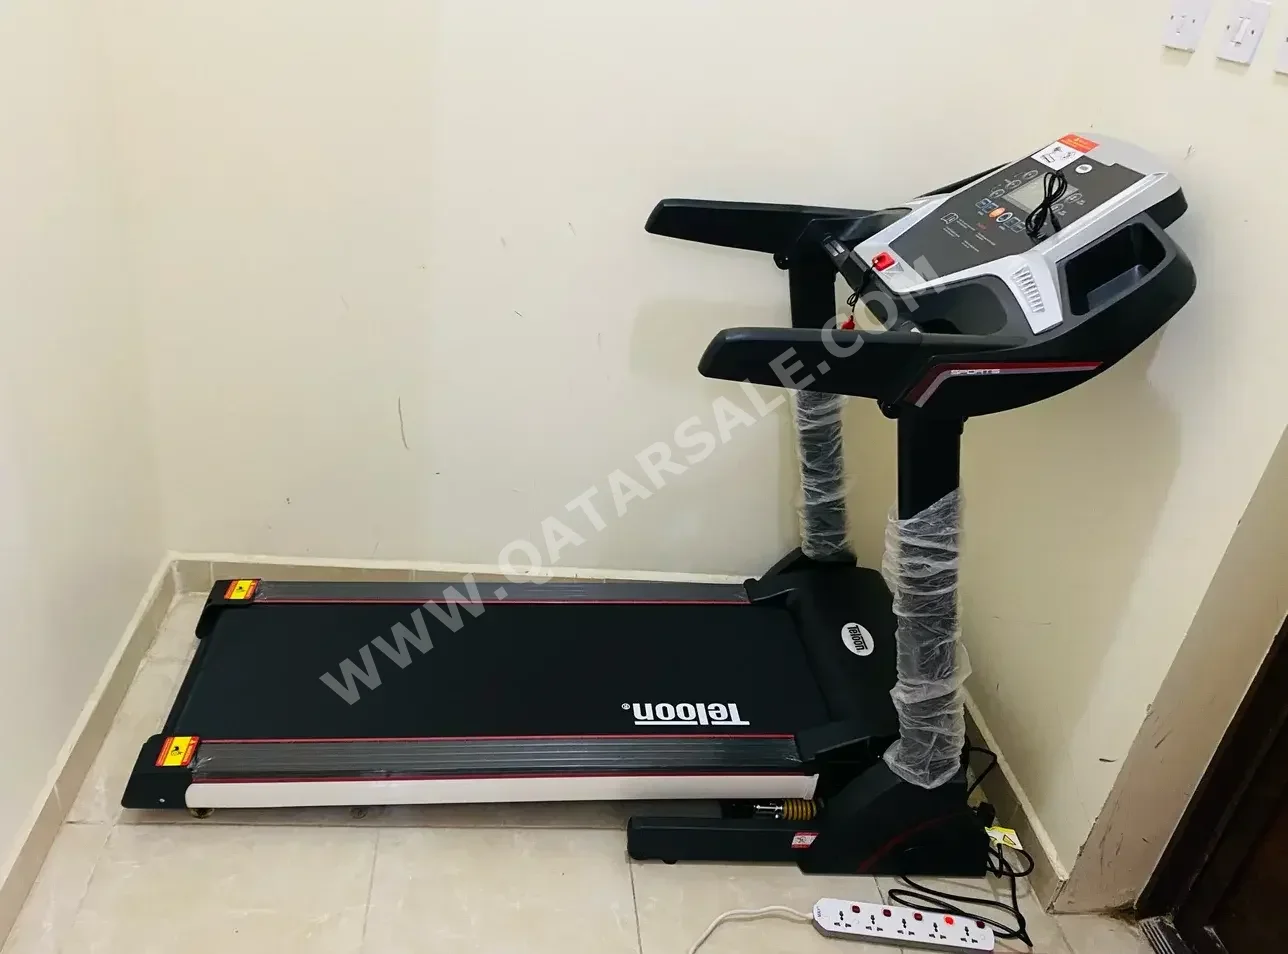 Gym Equipment Machines Treadmill  Teloon  Black  43 CM  With Delivery  With Installation  Warranty  115 Kg